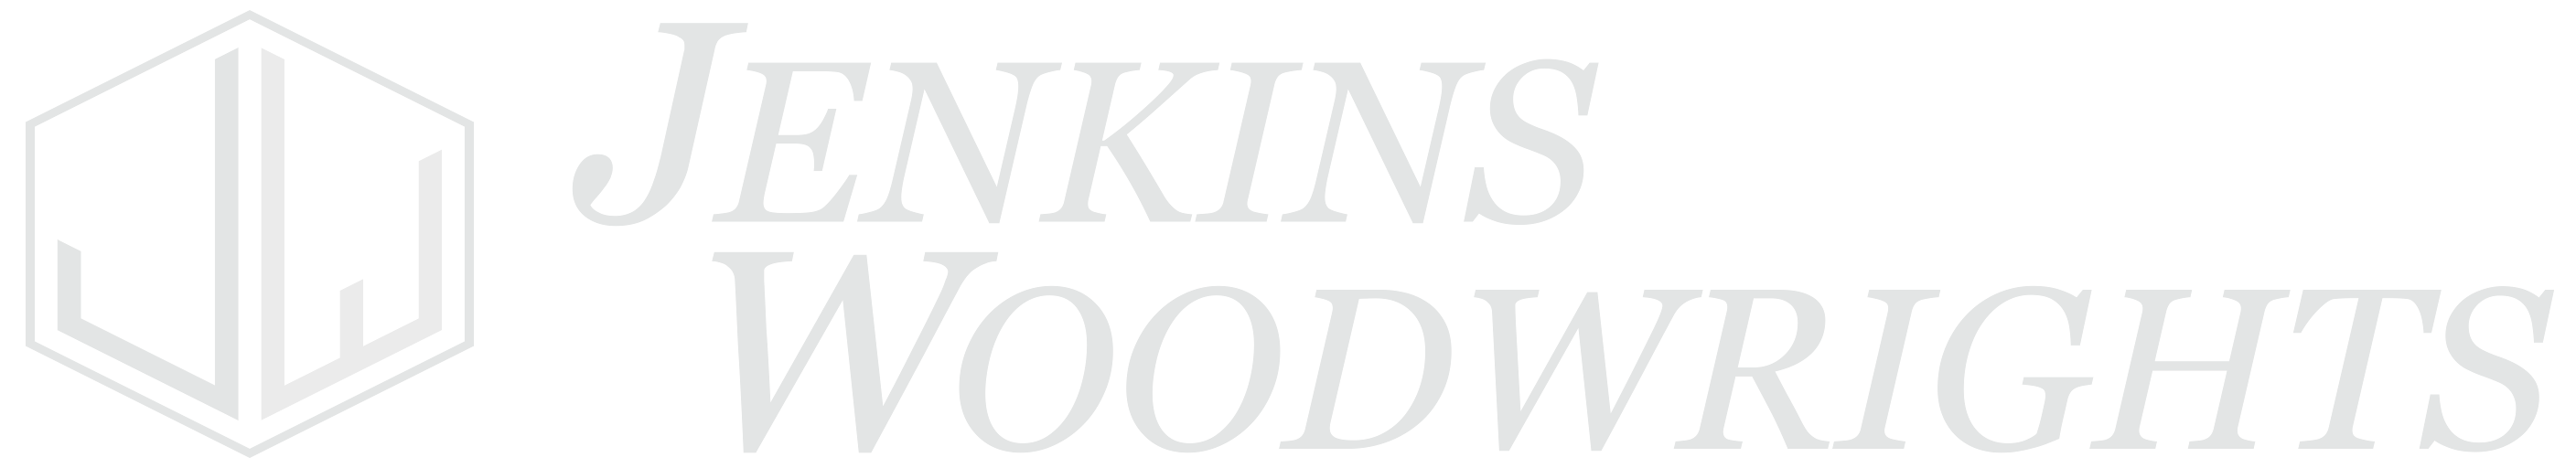 Jenkins Woodwrights